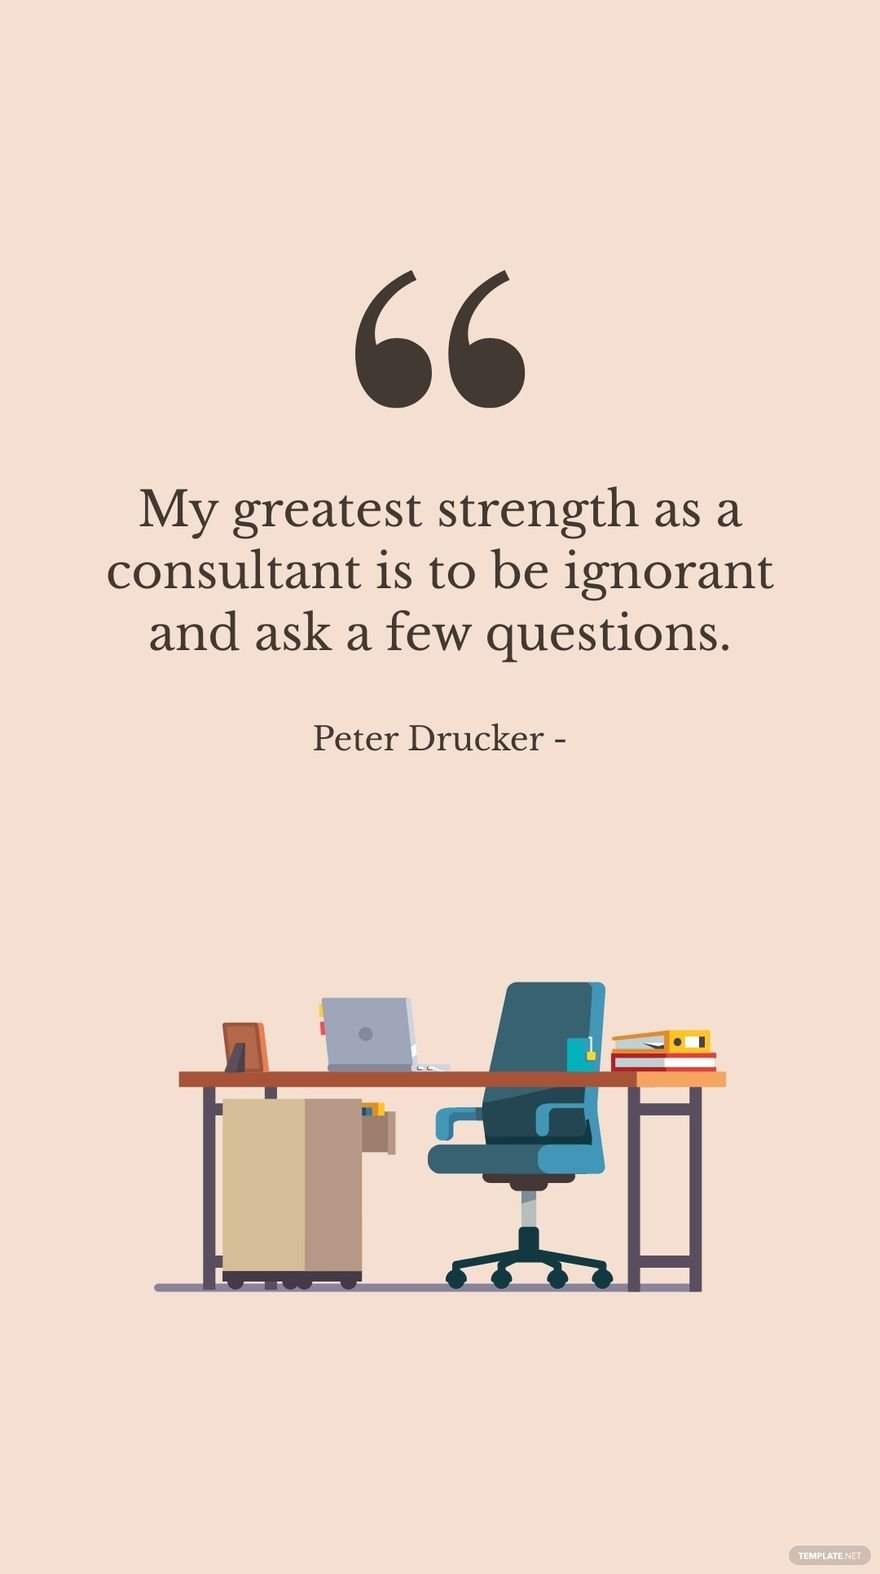 Peter Drucker - My greatest strength as a consultant is to be ignorant and ask a few questions.